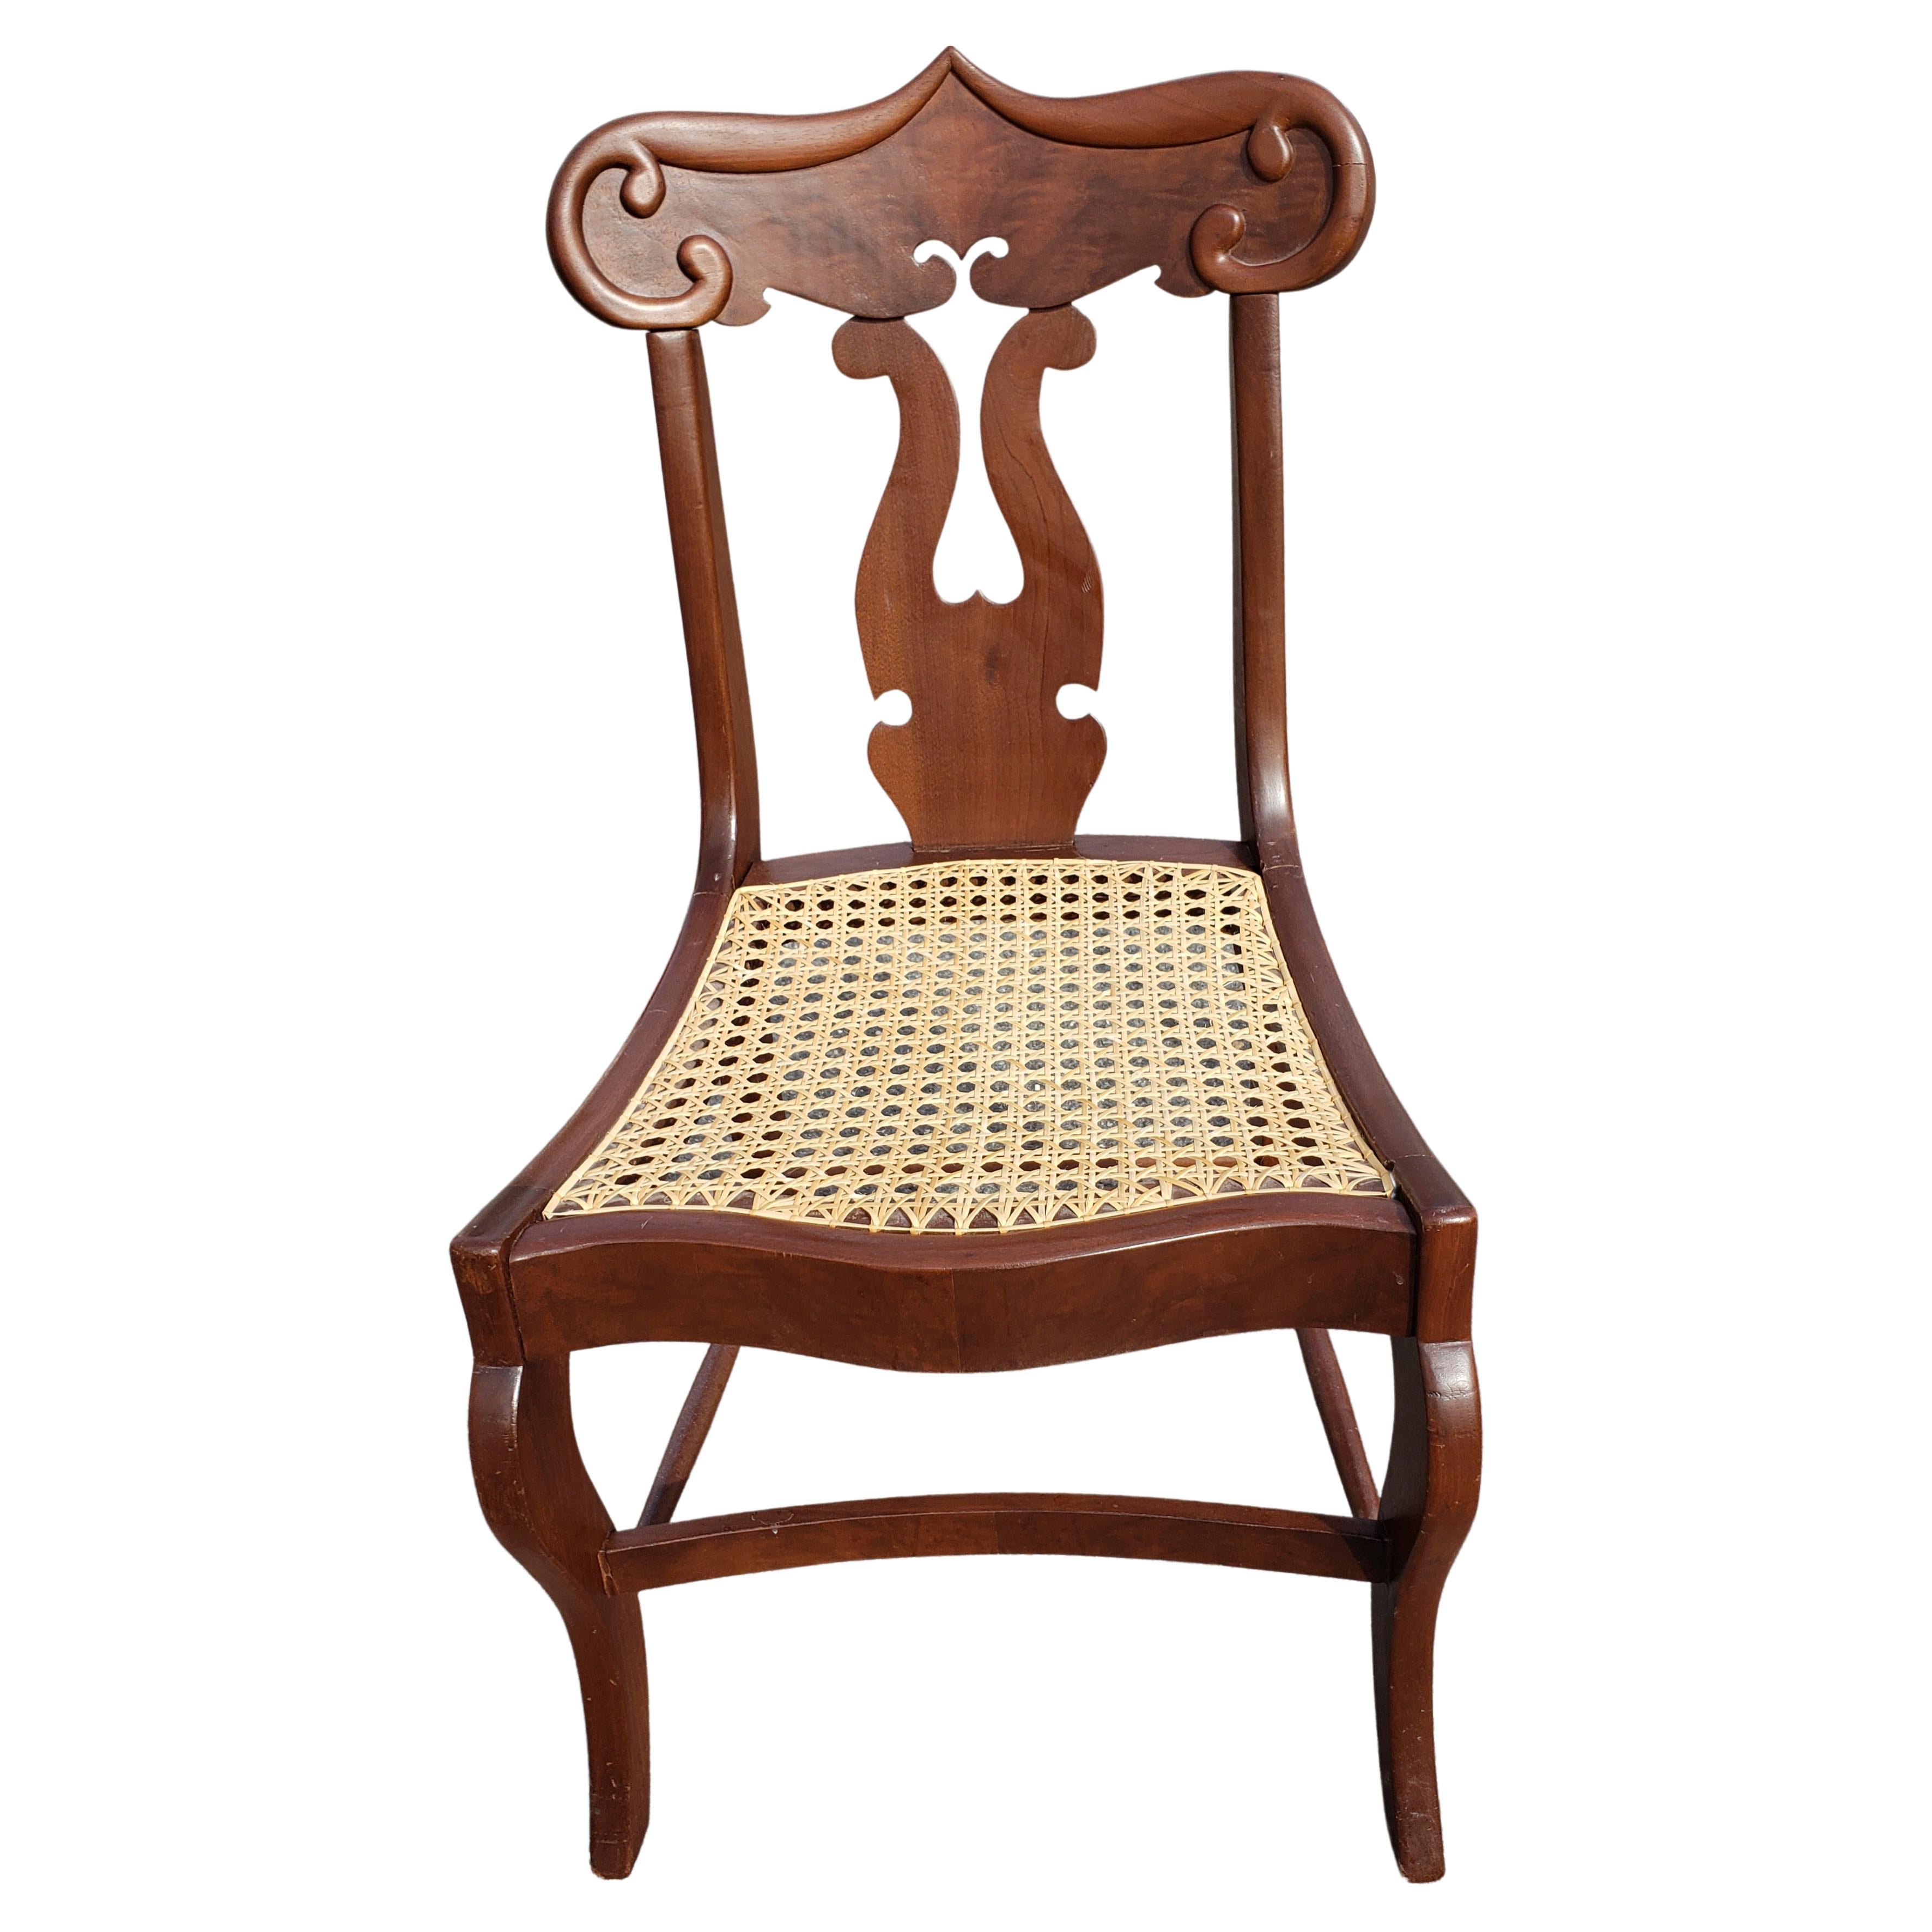 American Empire Flame Mahogany Cane Seat Chairs, circa 1890s a Pair For Sale 1